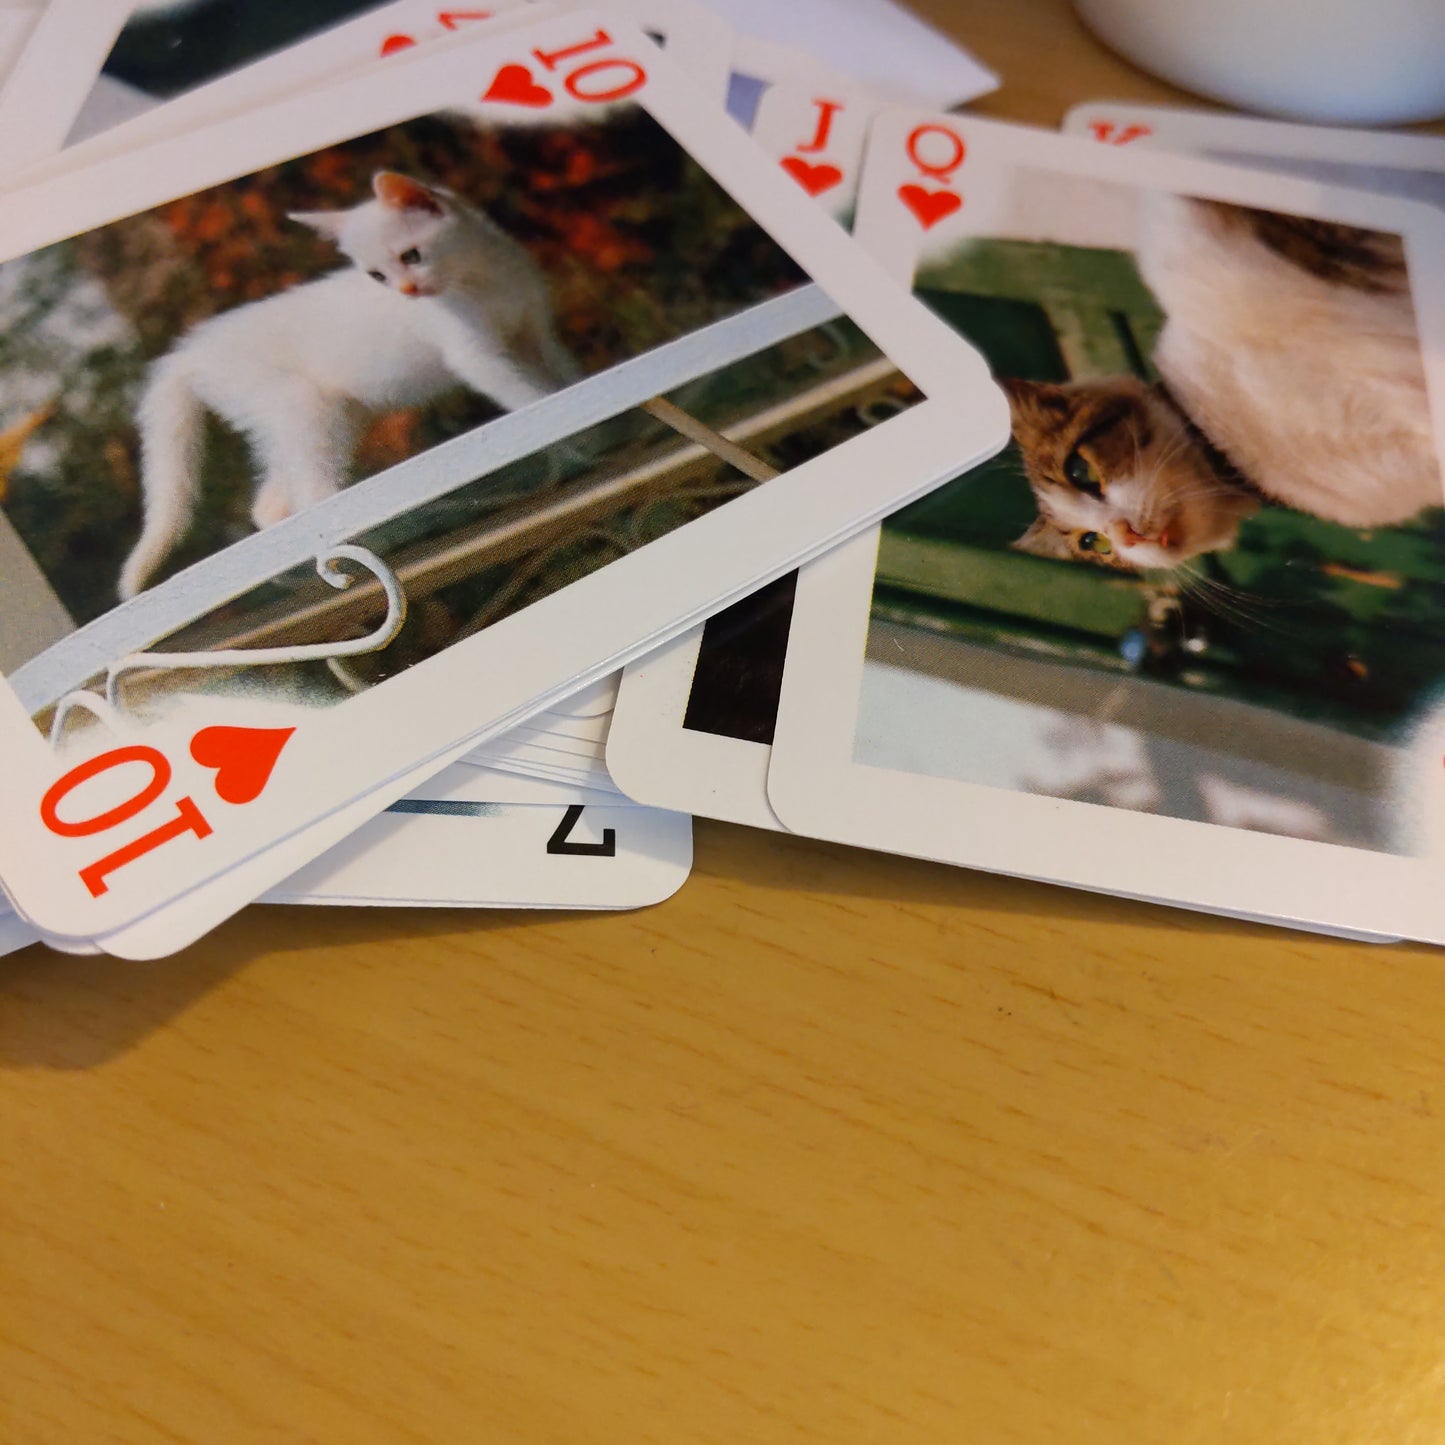 54 Playing Cards of Cats